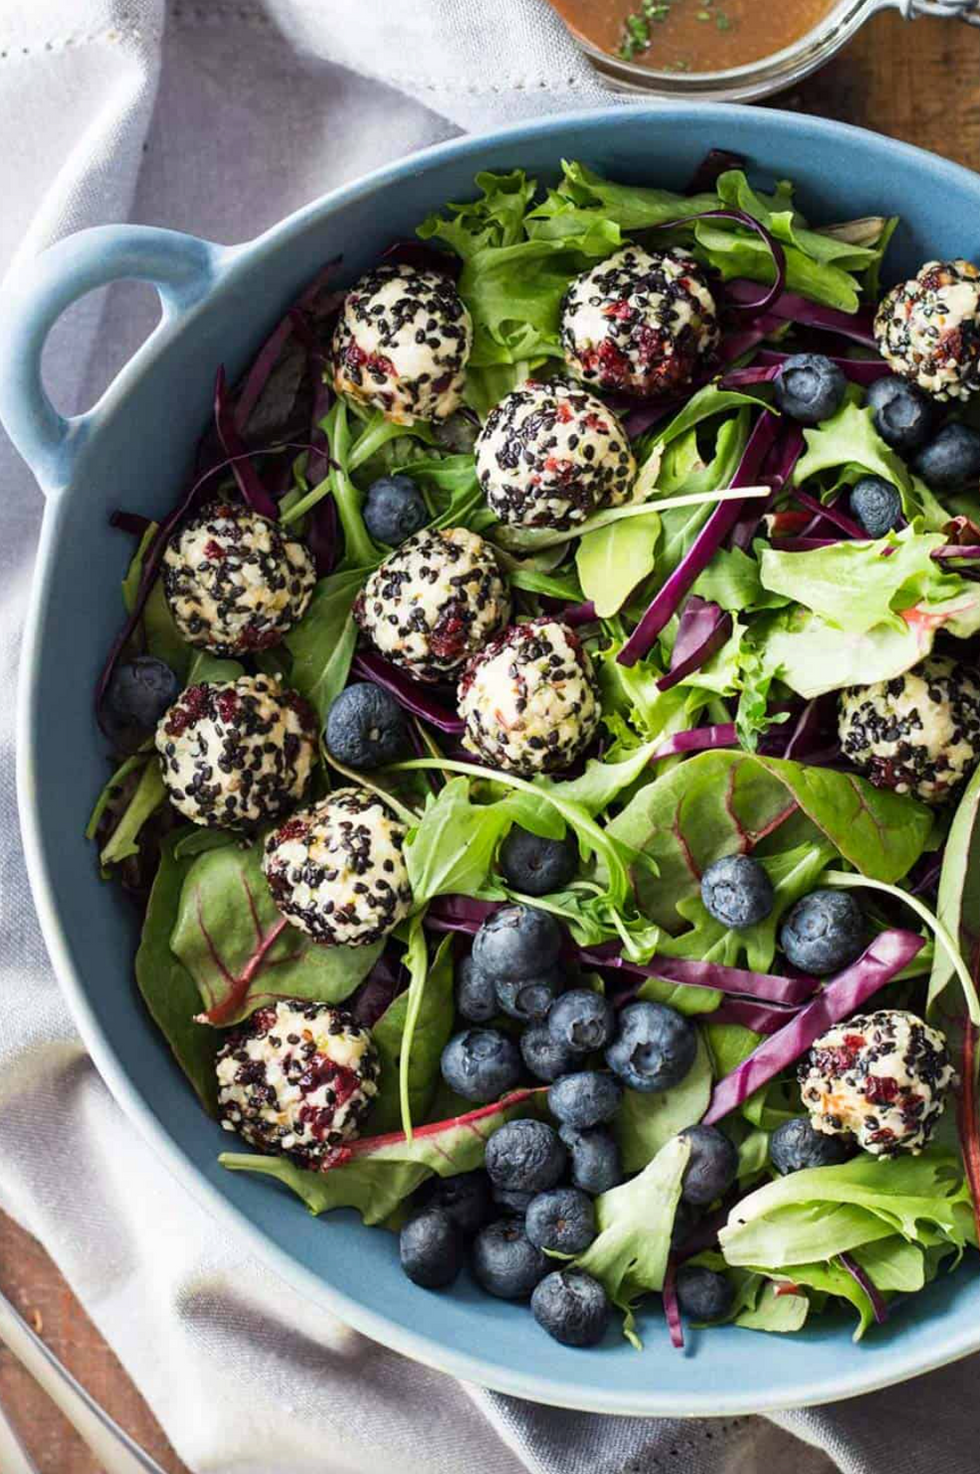 Seeded Warm Goat Cheese Salad